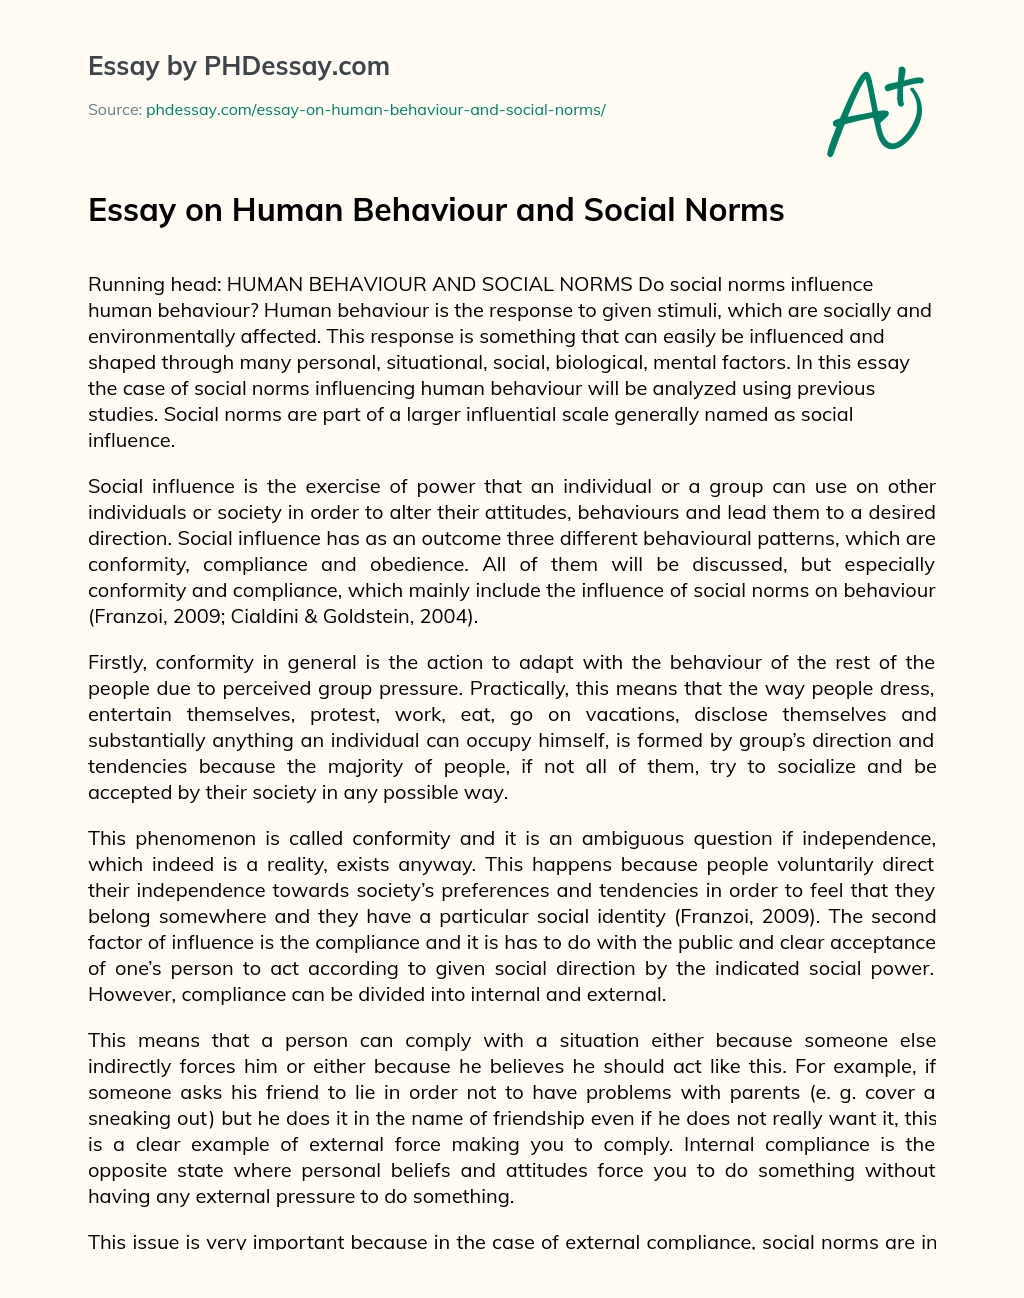 Essay on Human Behaviour and Social Norms essay